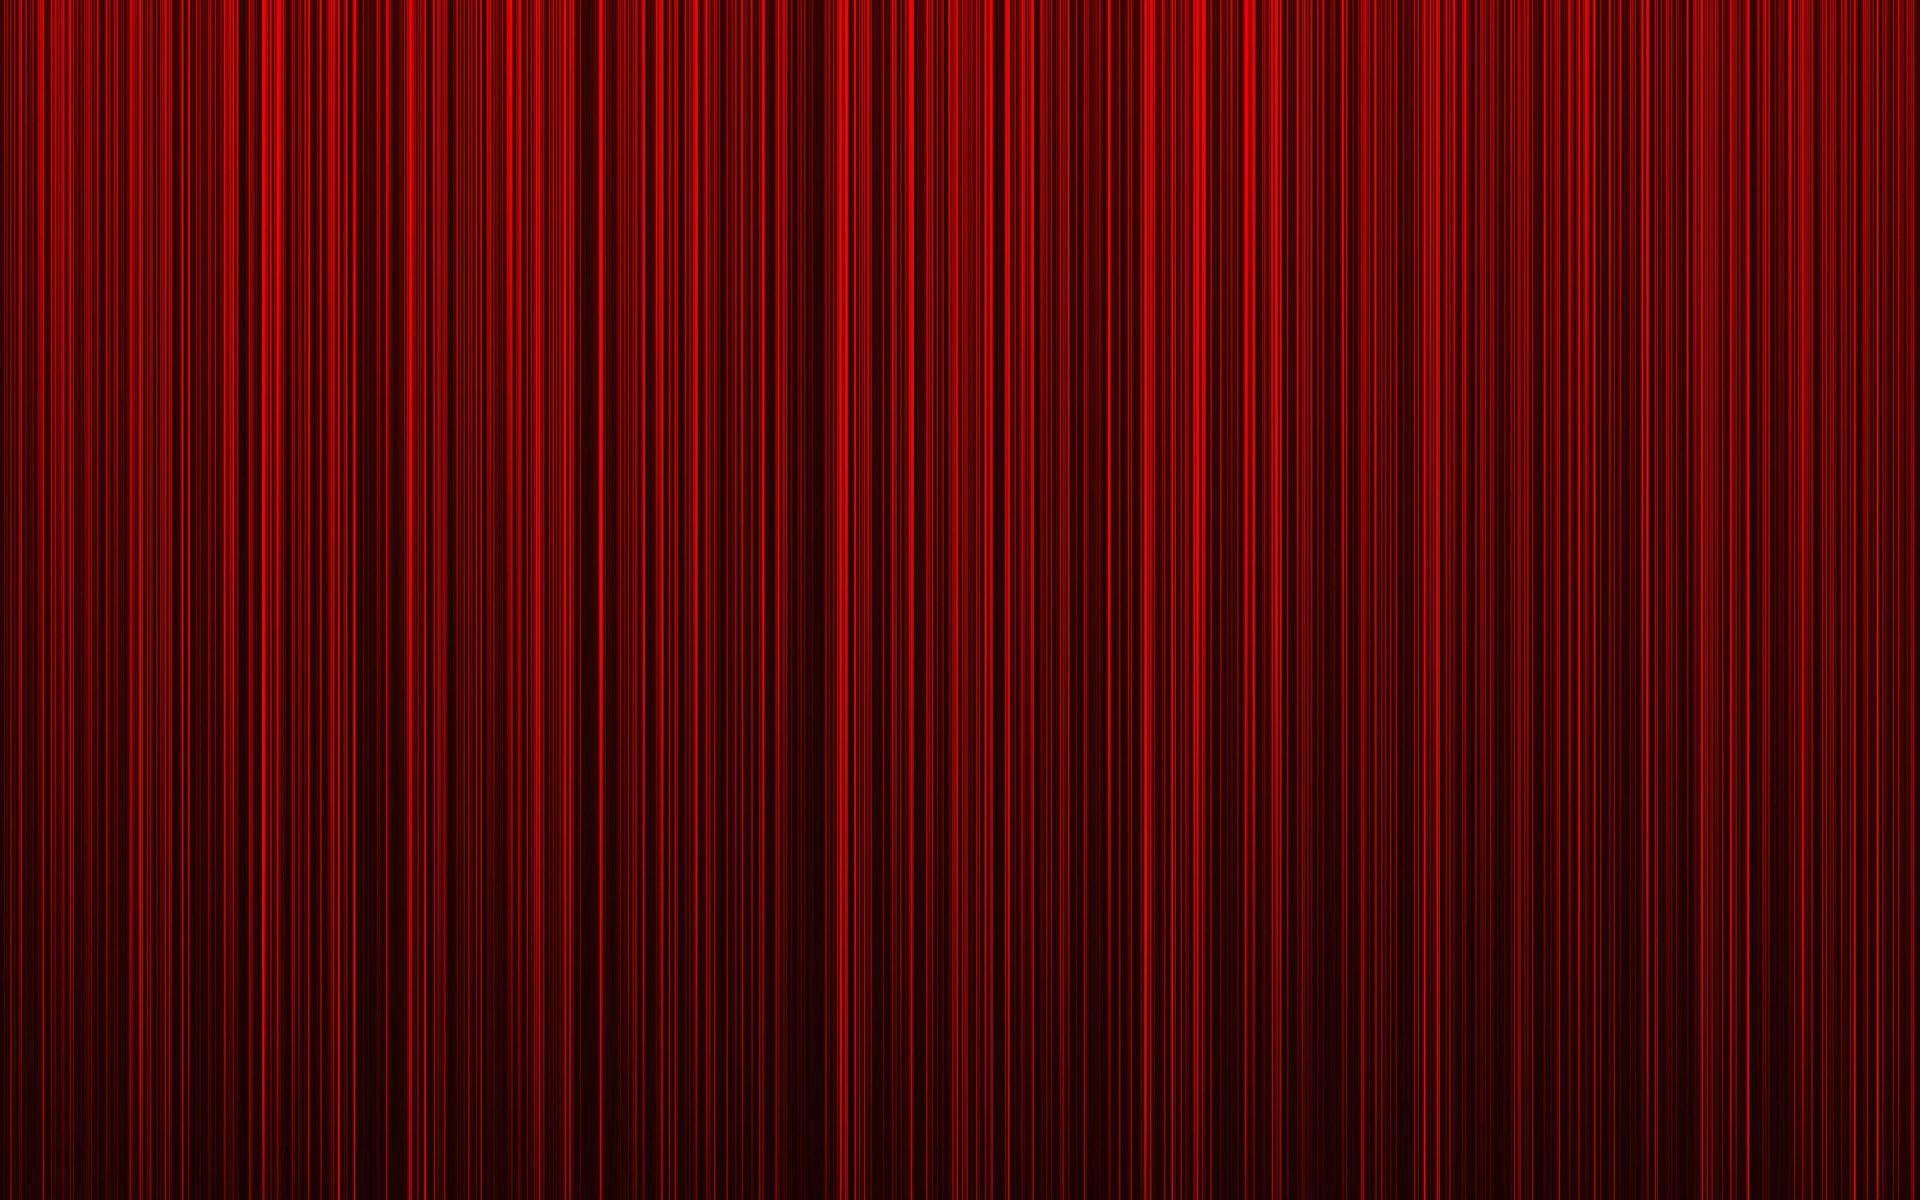 67892 download wallpaper vertical, abstract, red, lines, stripes, streaks screensavers and pictures for free